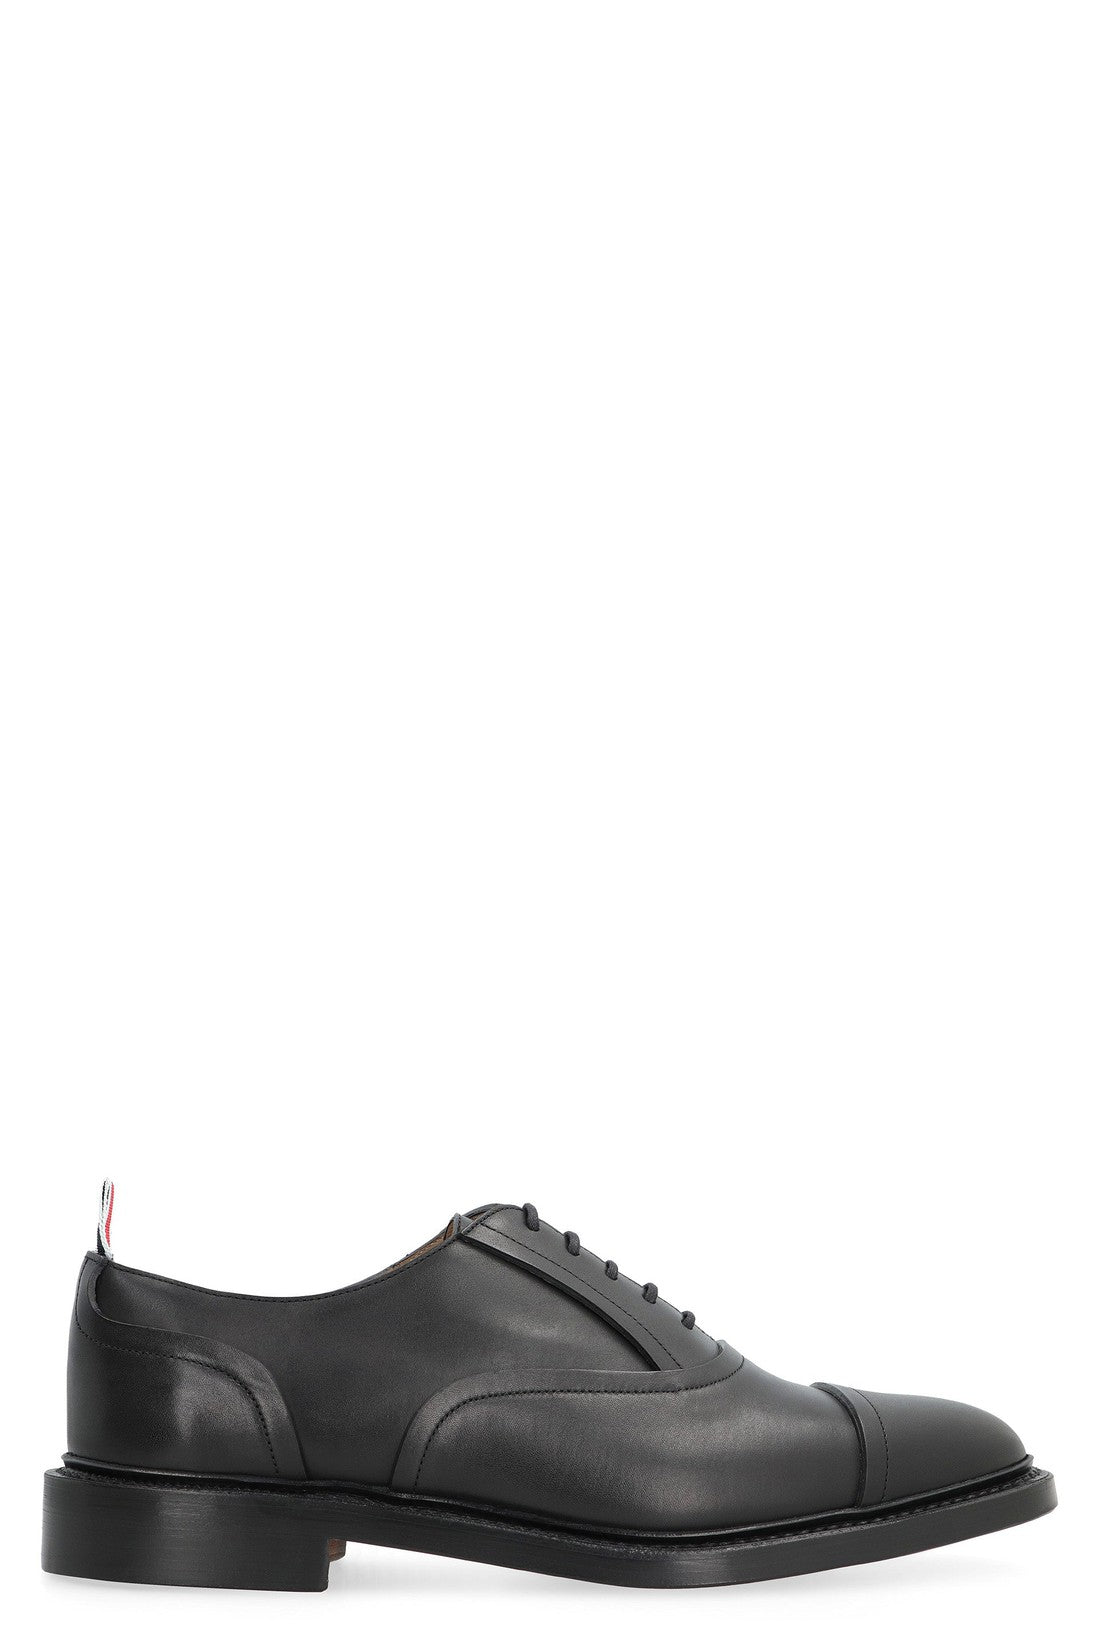 Thom Browne-OUTLET-SALE-Leather lace-up shoes-ARCHIVIST